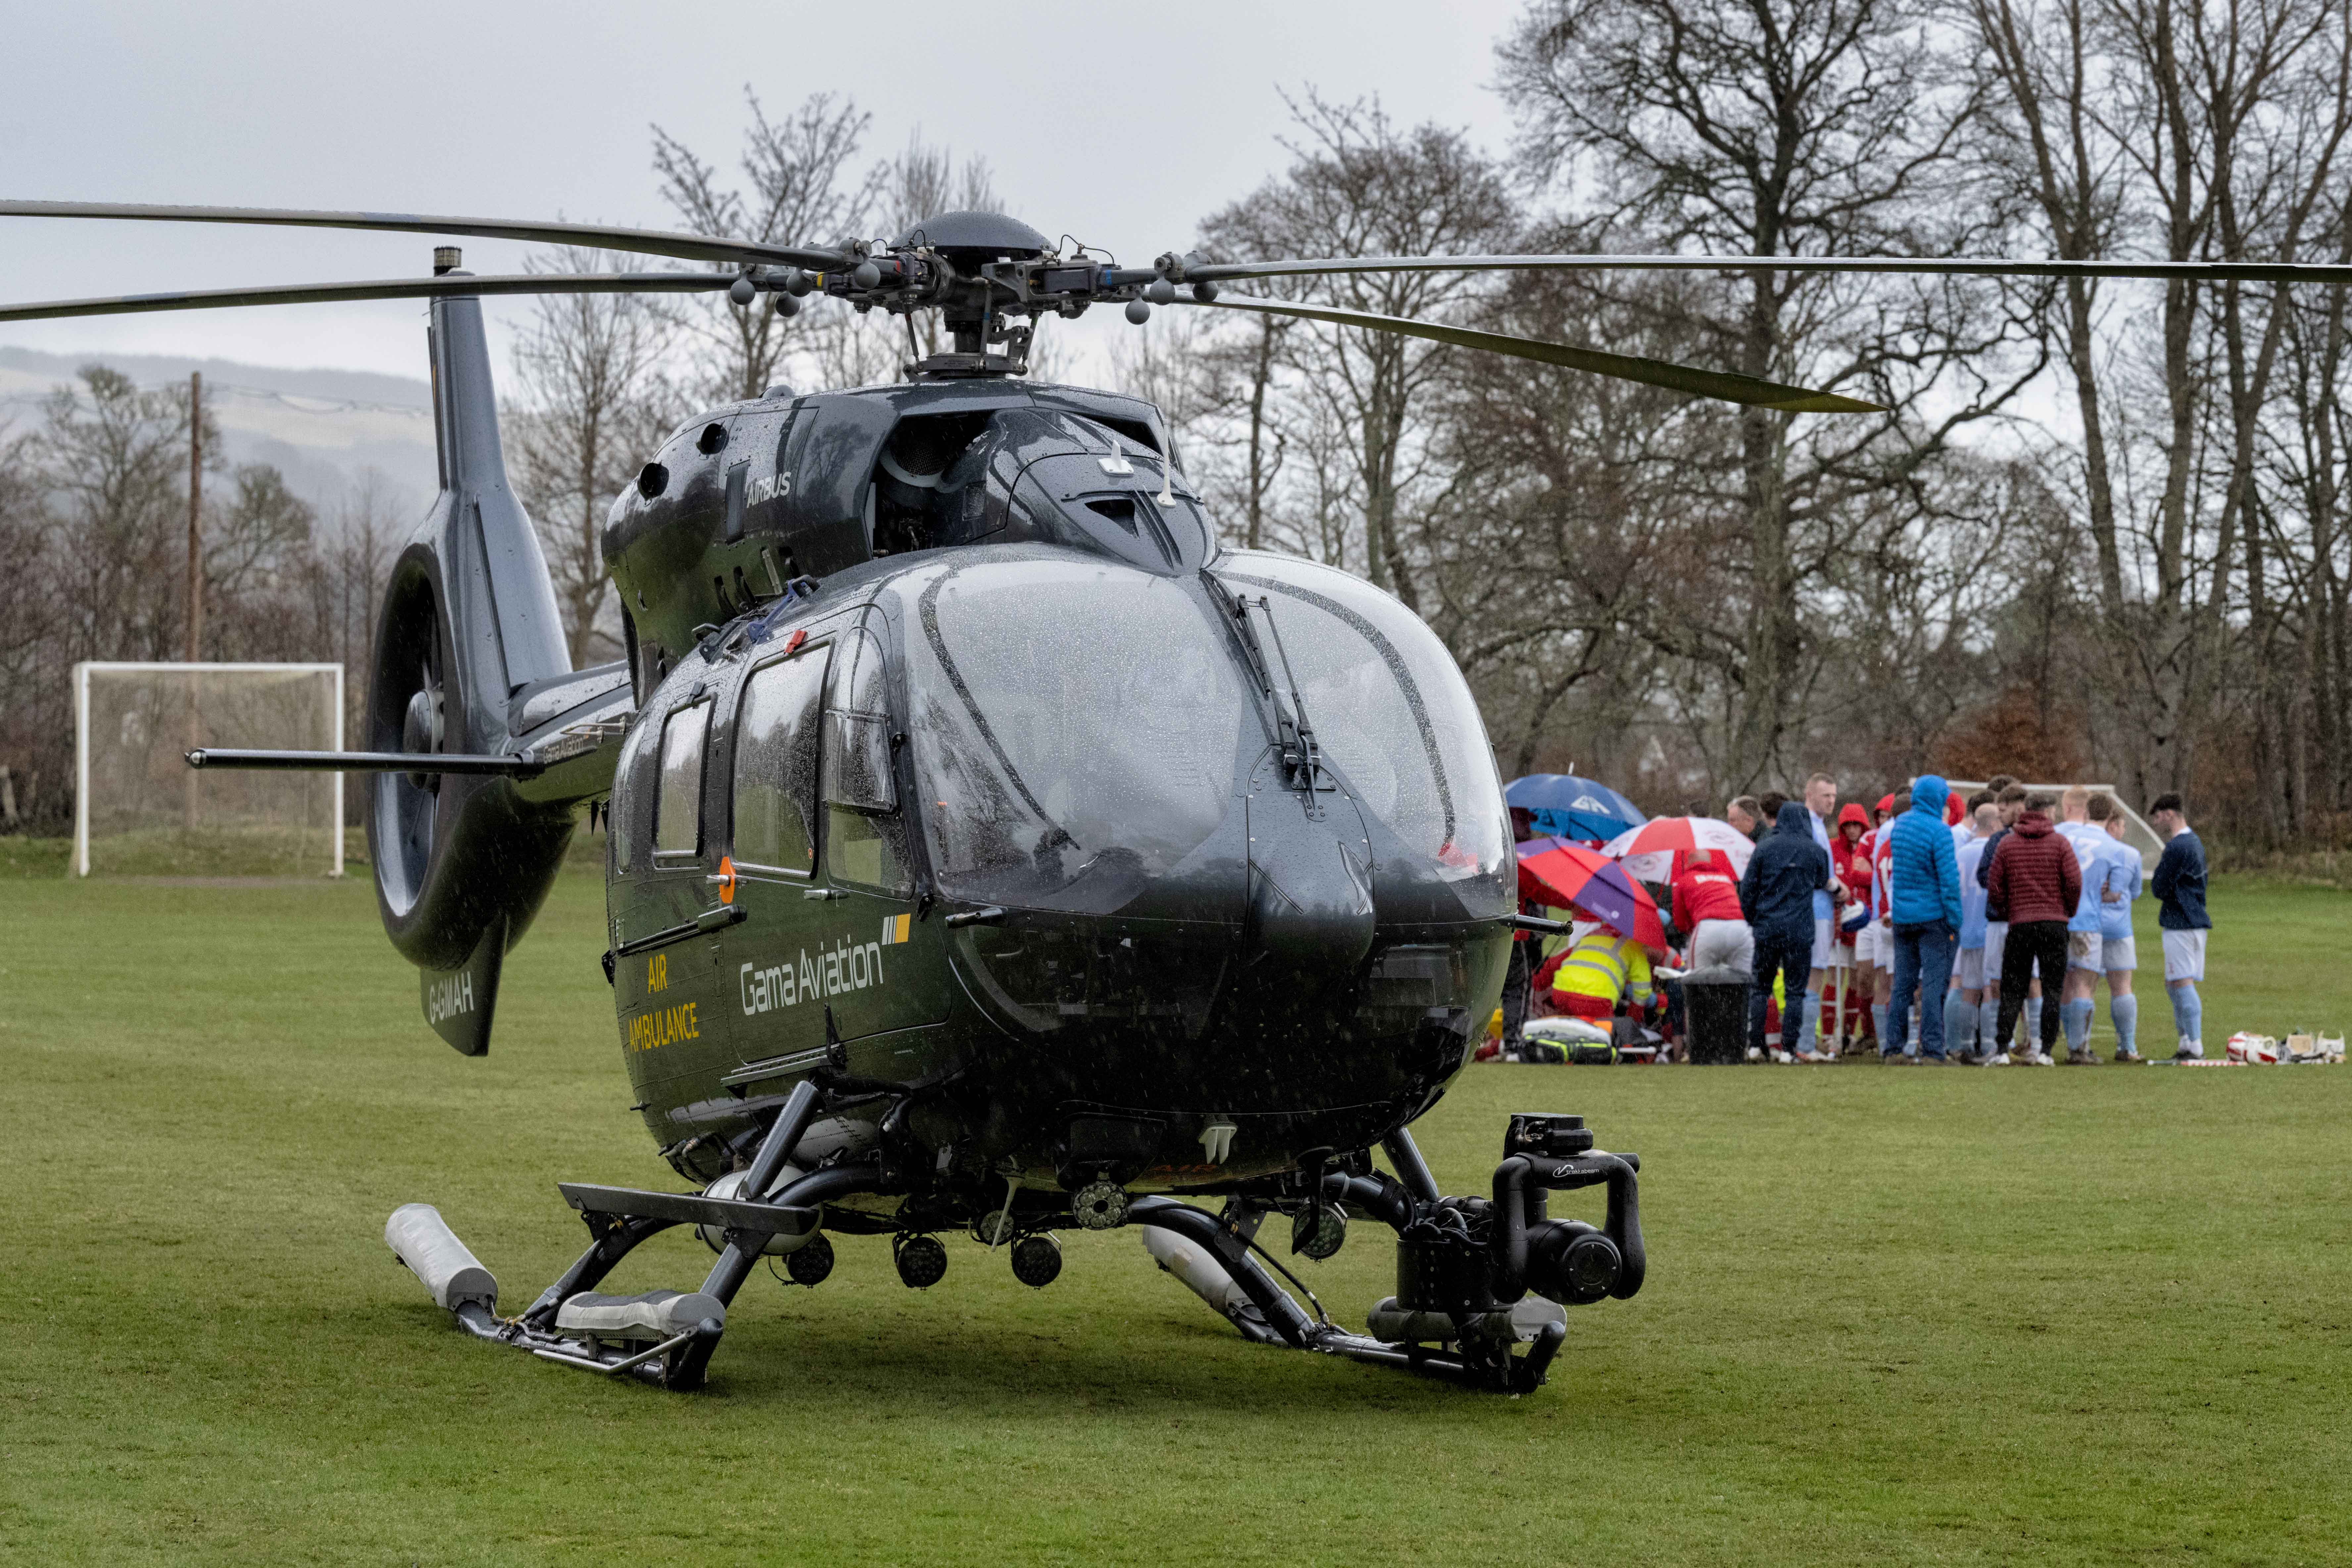 The Air Ambulance had landed on the shinty pitch and medical assistance was continued for the referee Steven MacLachlan.